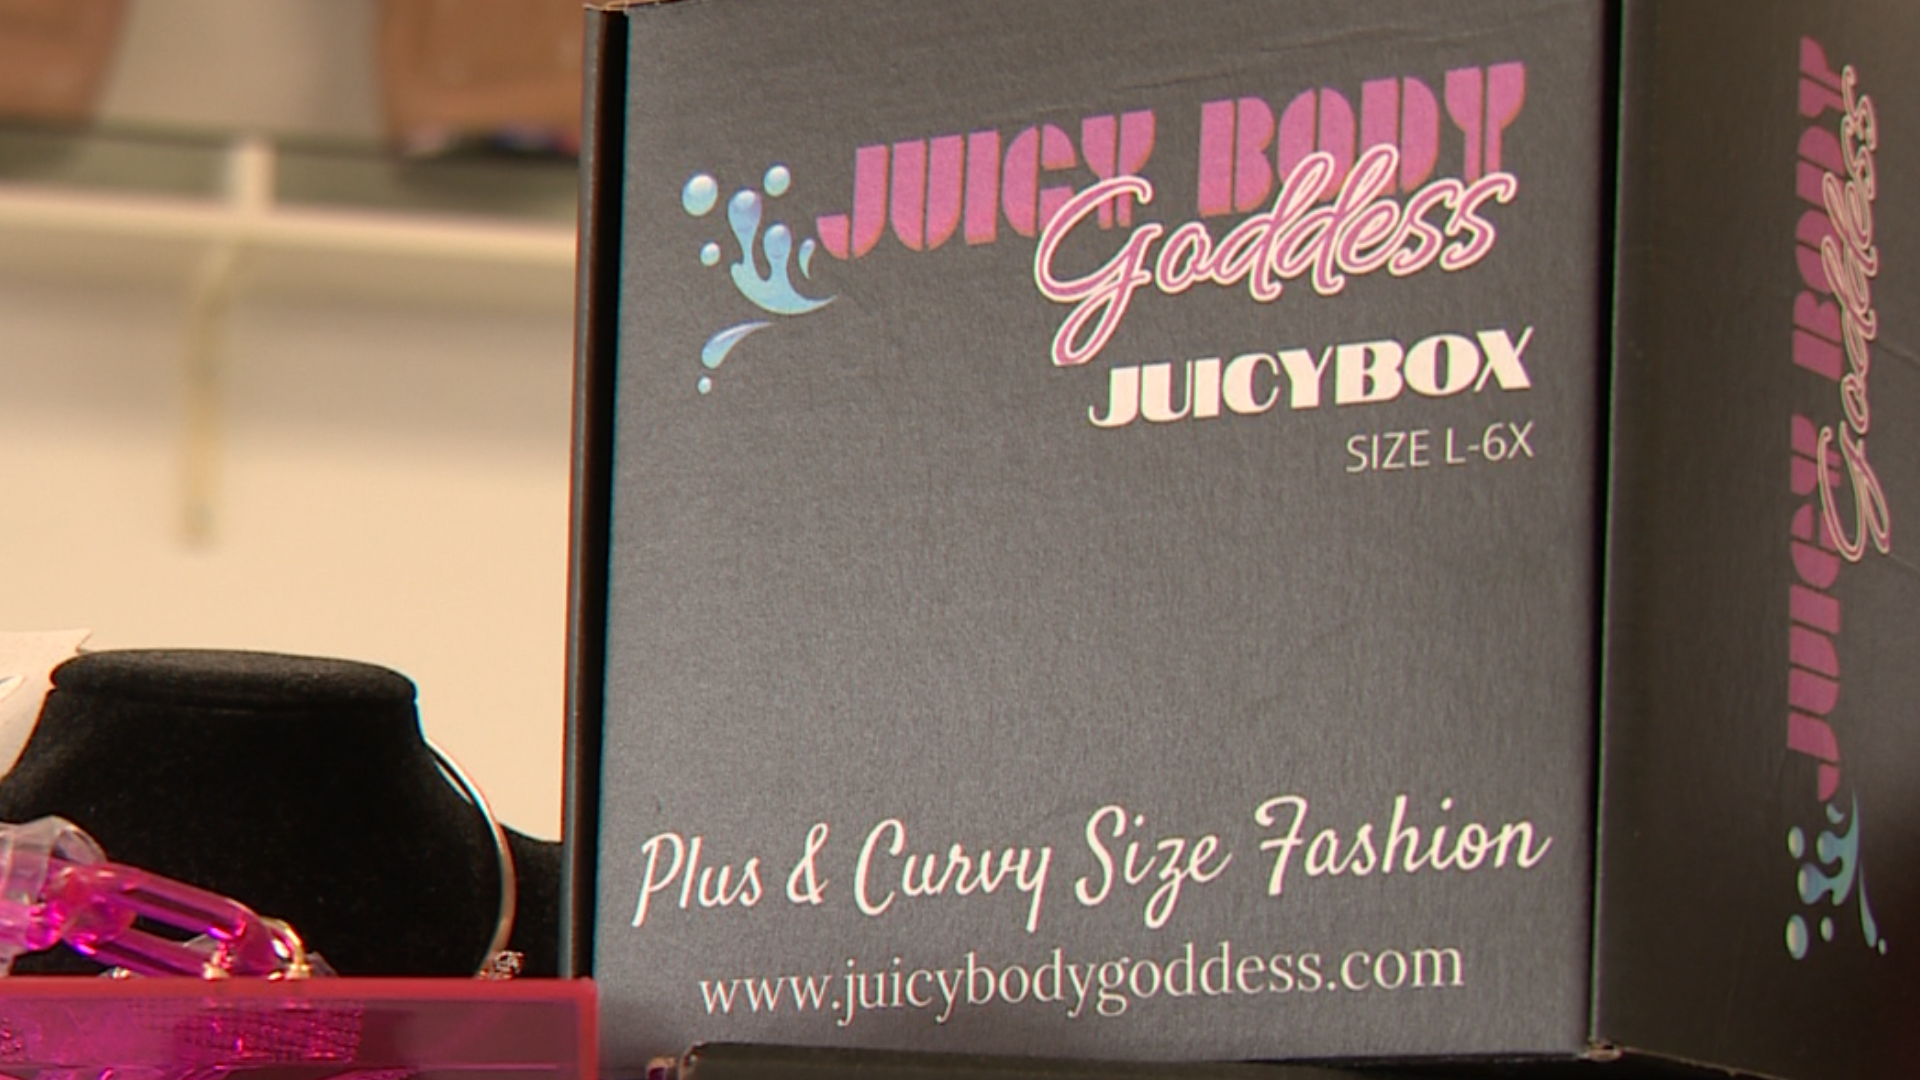 Summer Lucille owns Juicy Body Goddess in Charlotte. Her own struggles finding clothes in her size inspired her to open this business.